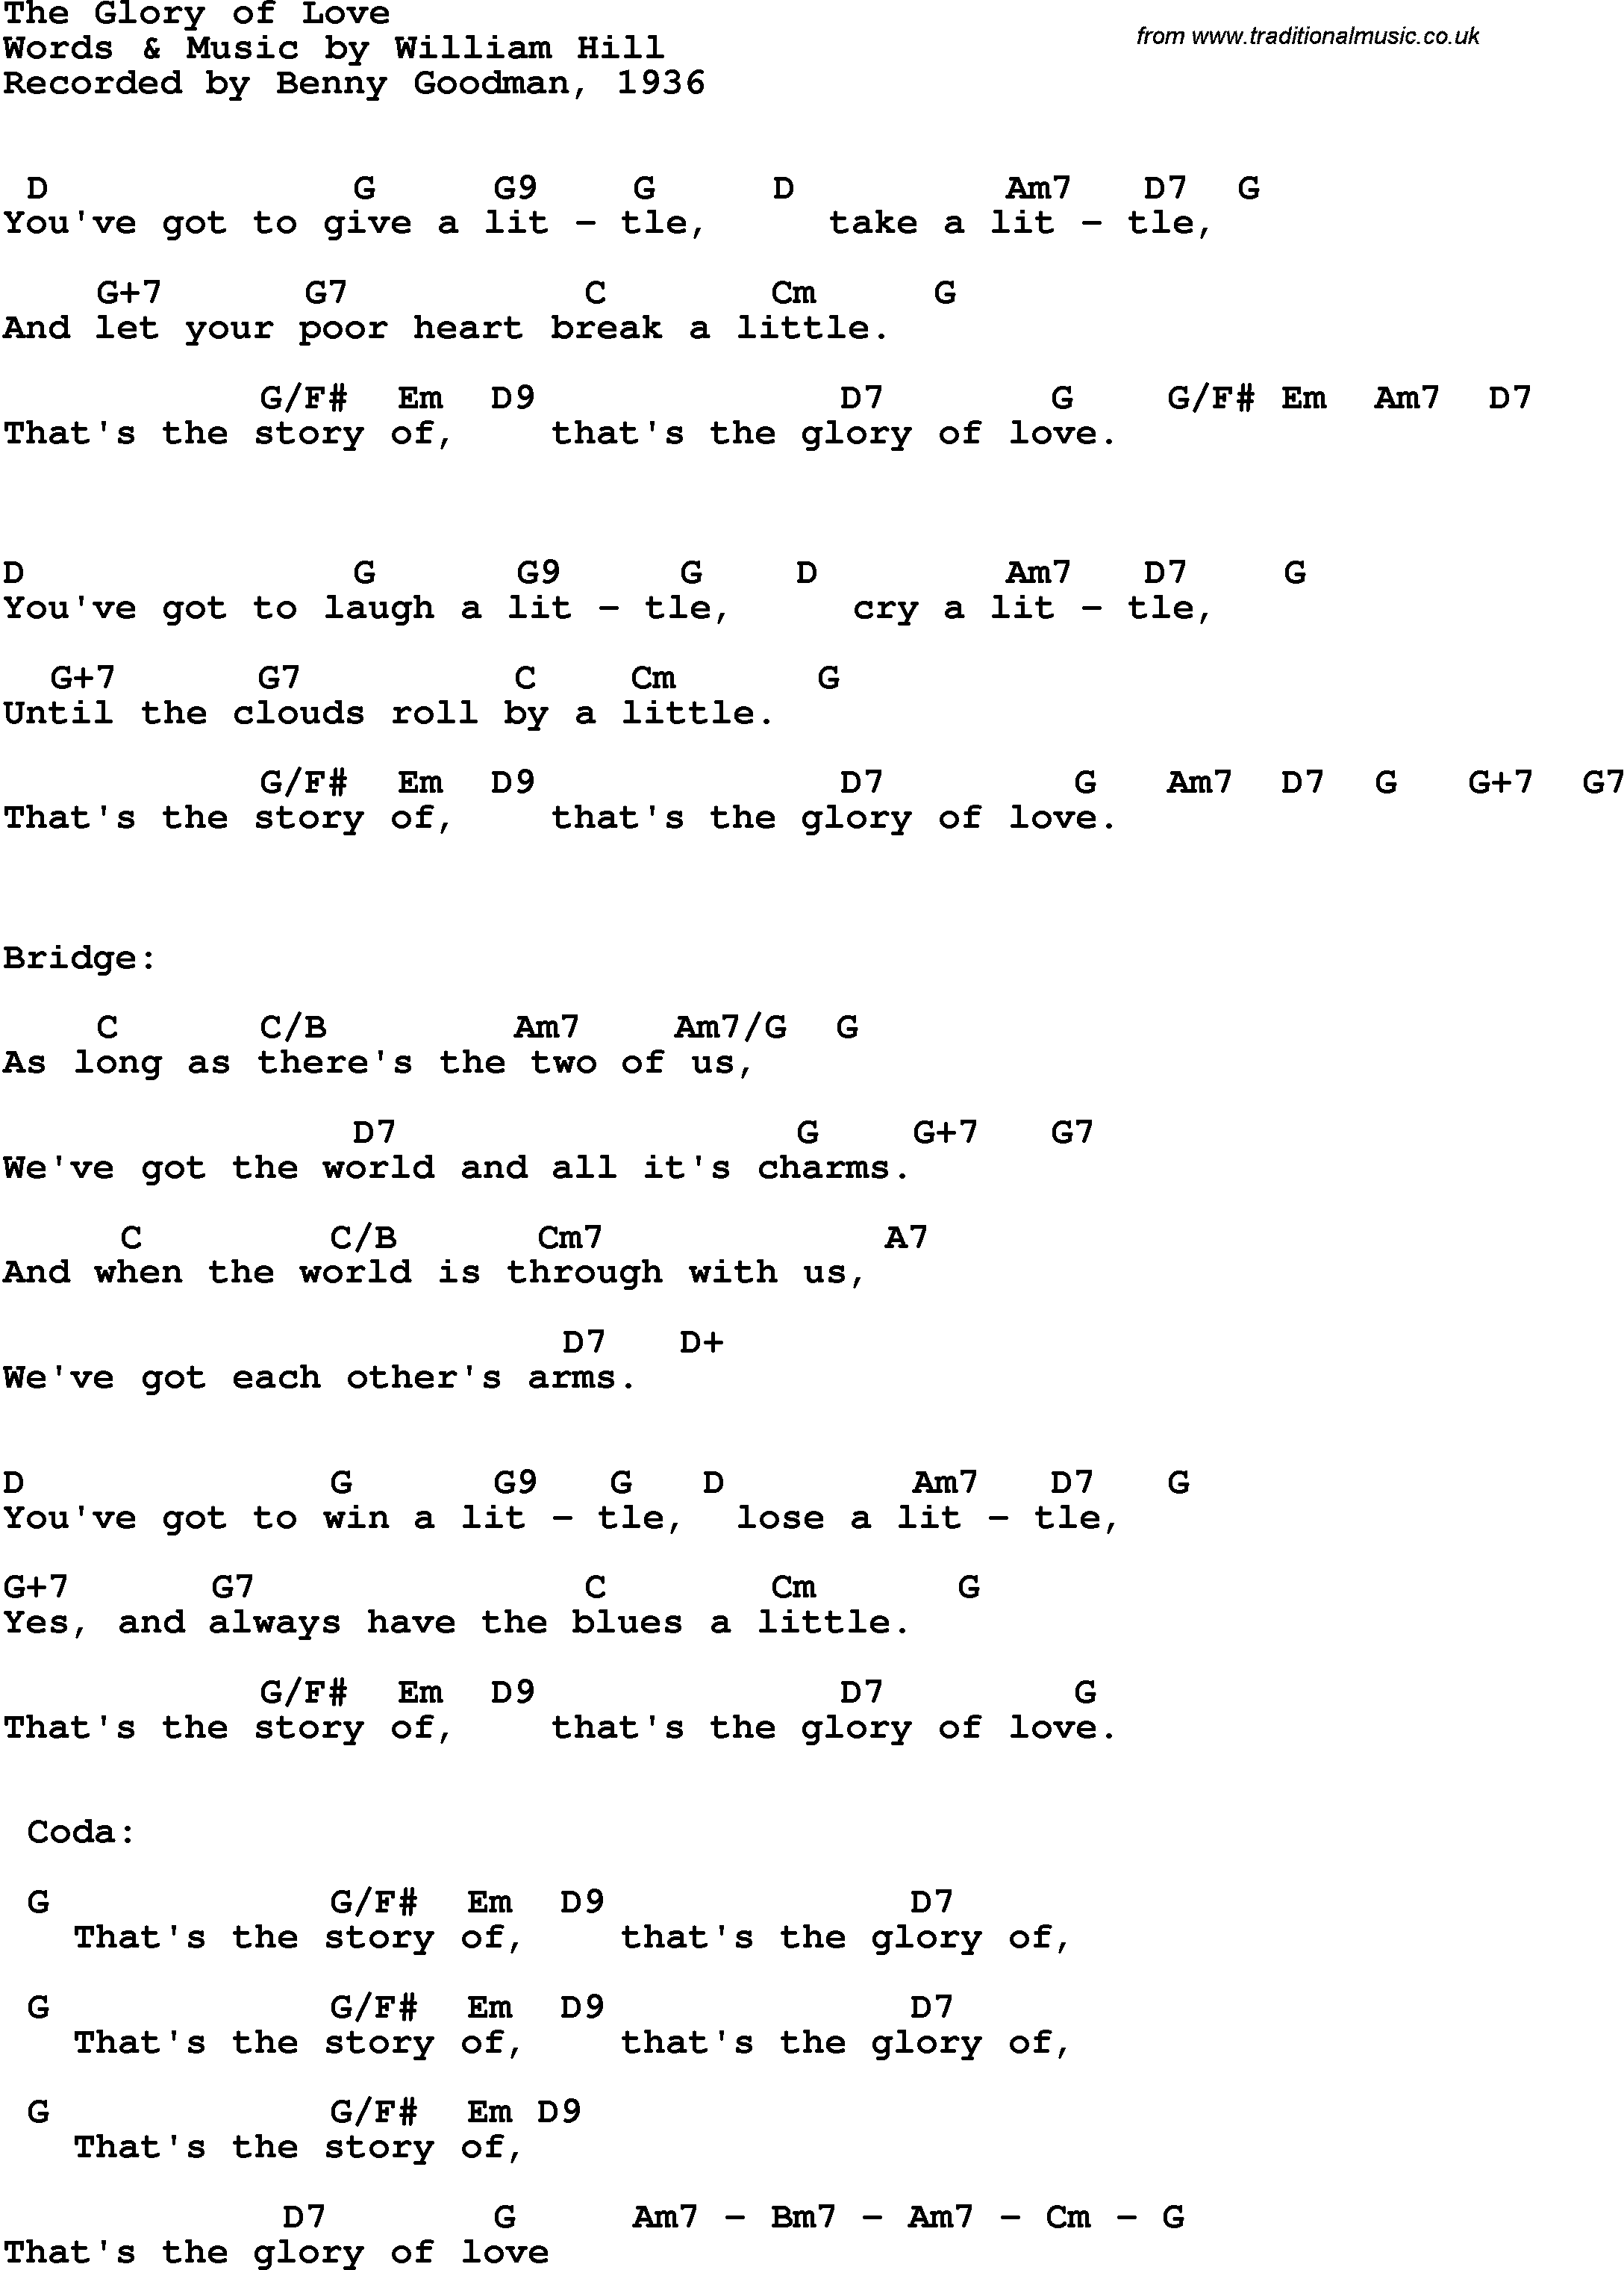 Song Lyrics with guitar chords for Glory Of Love, The - Benny Goodman, 1938